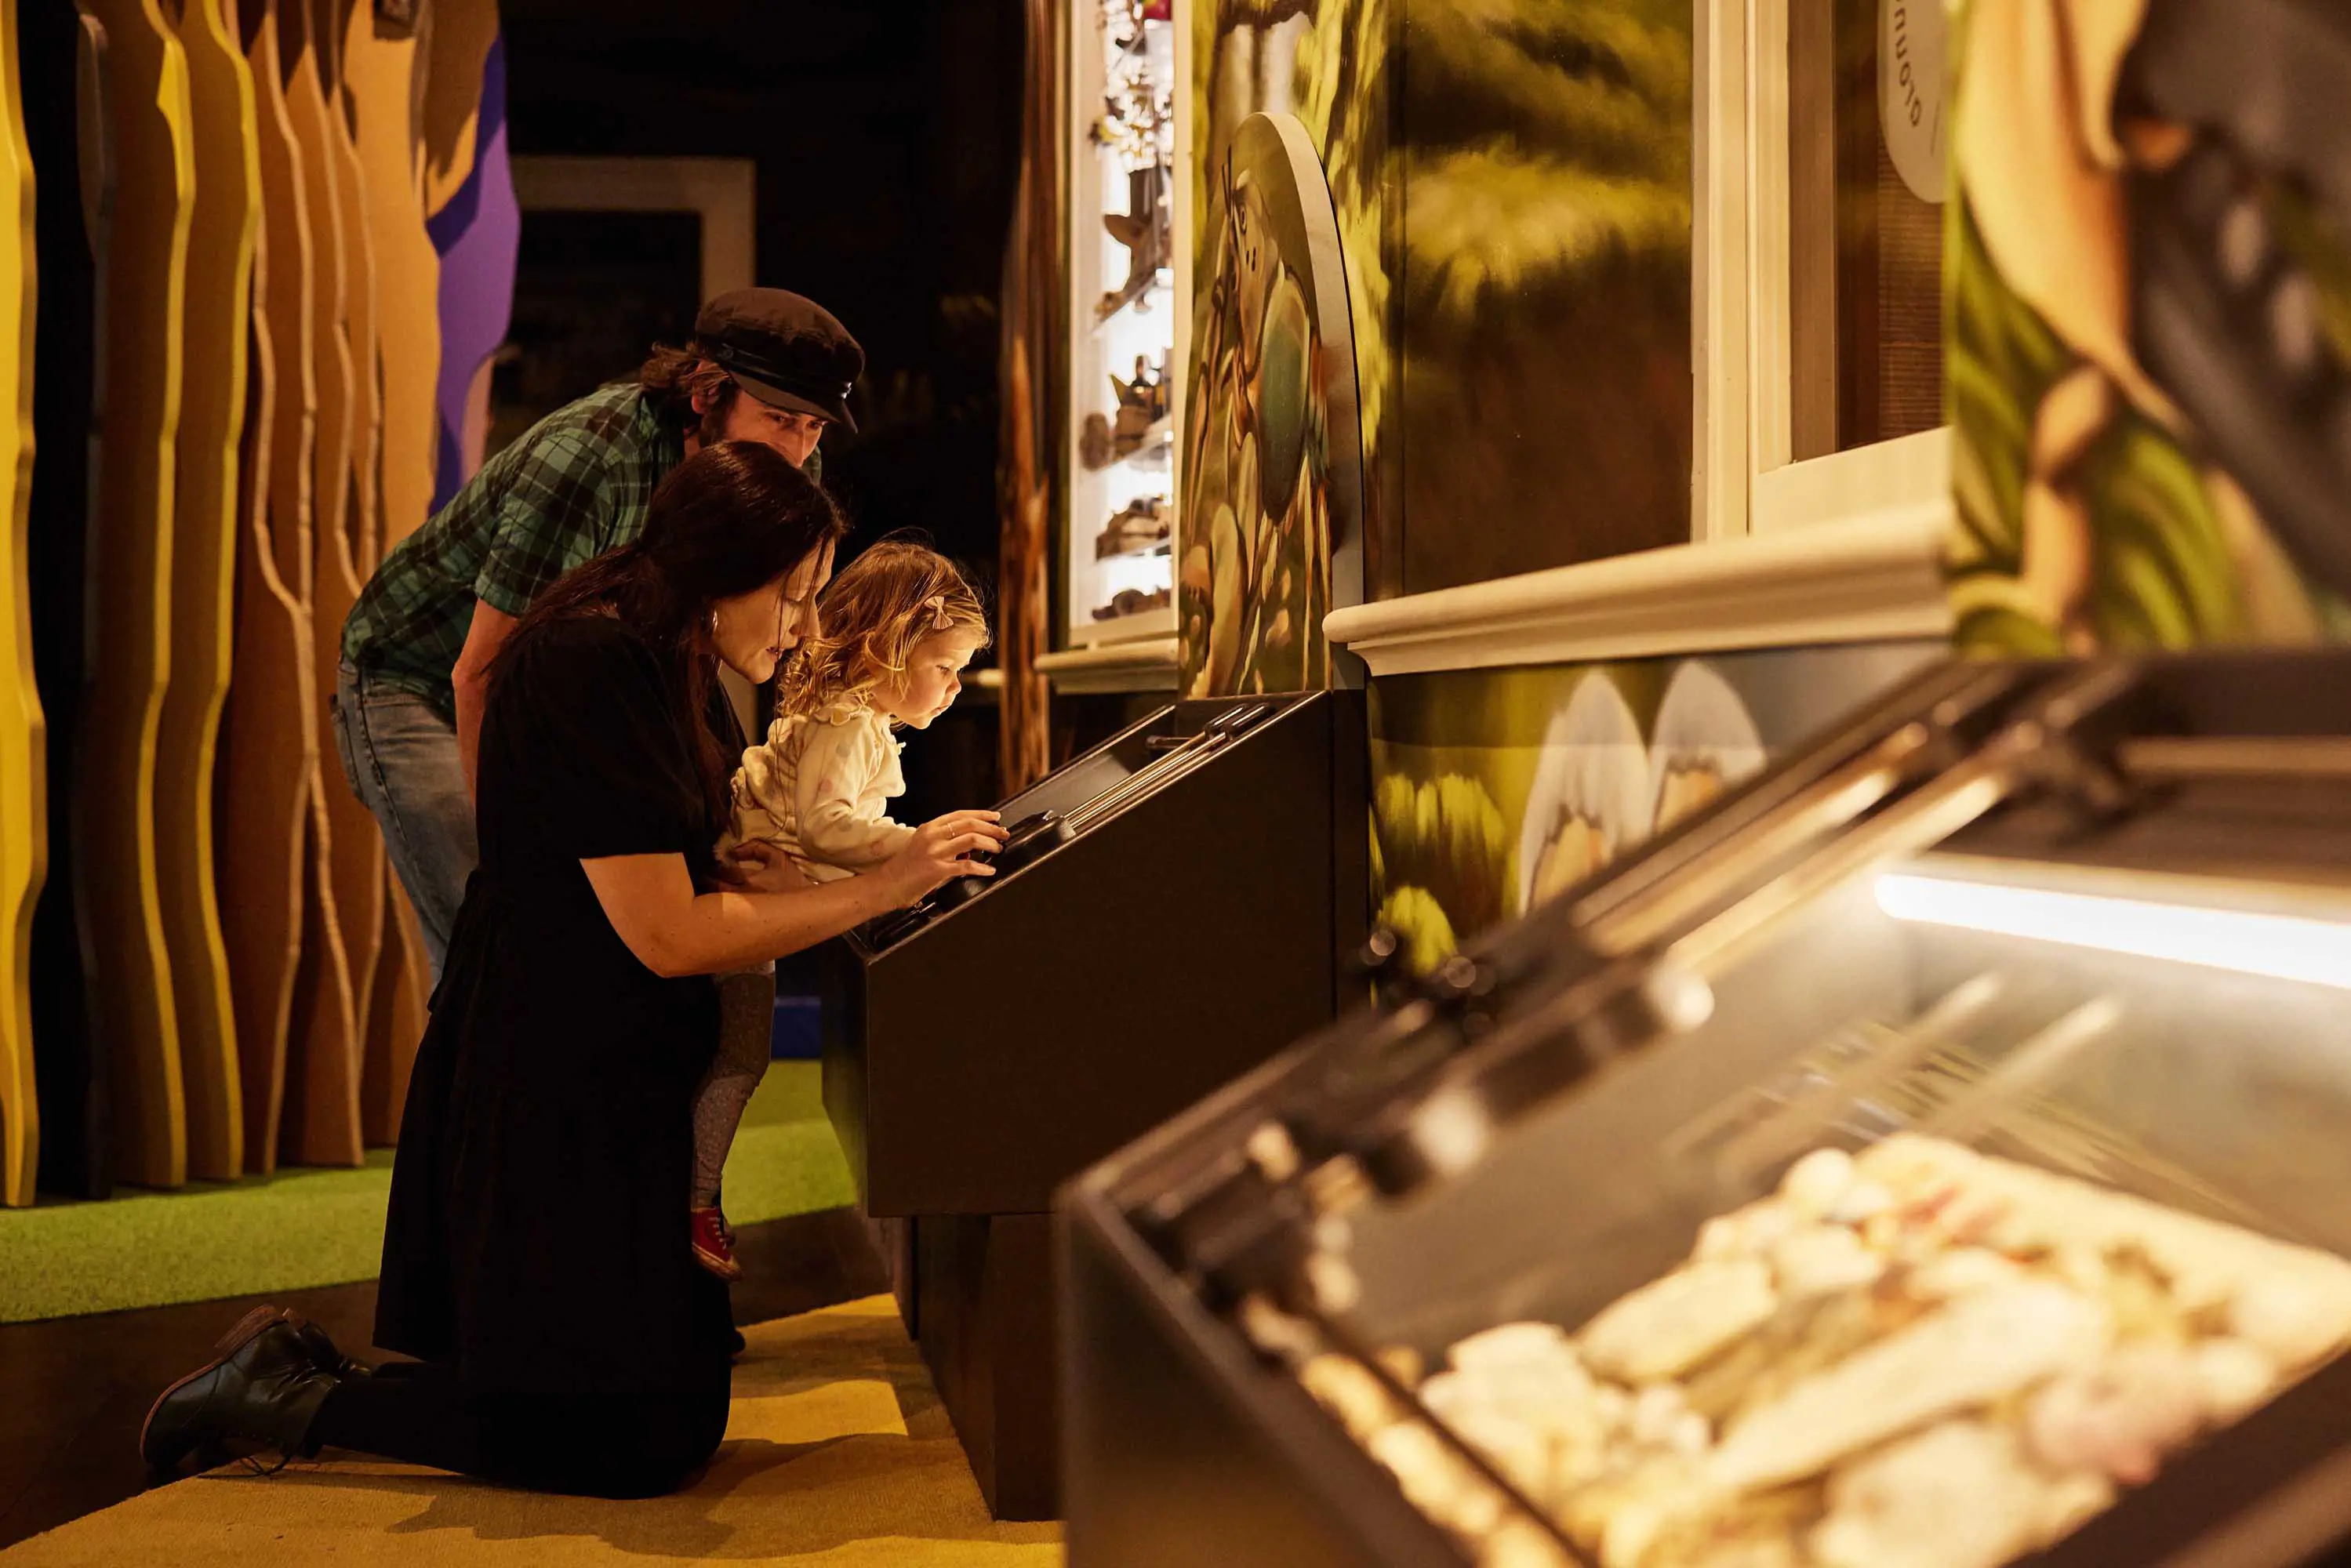 A young child looks at backlit displays with her mother and father.